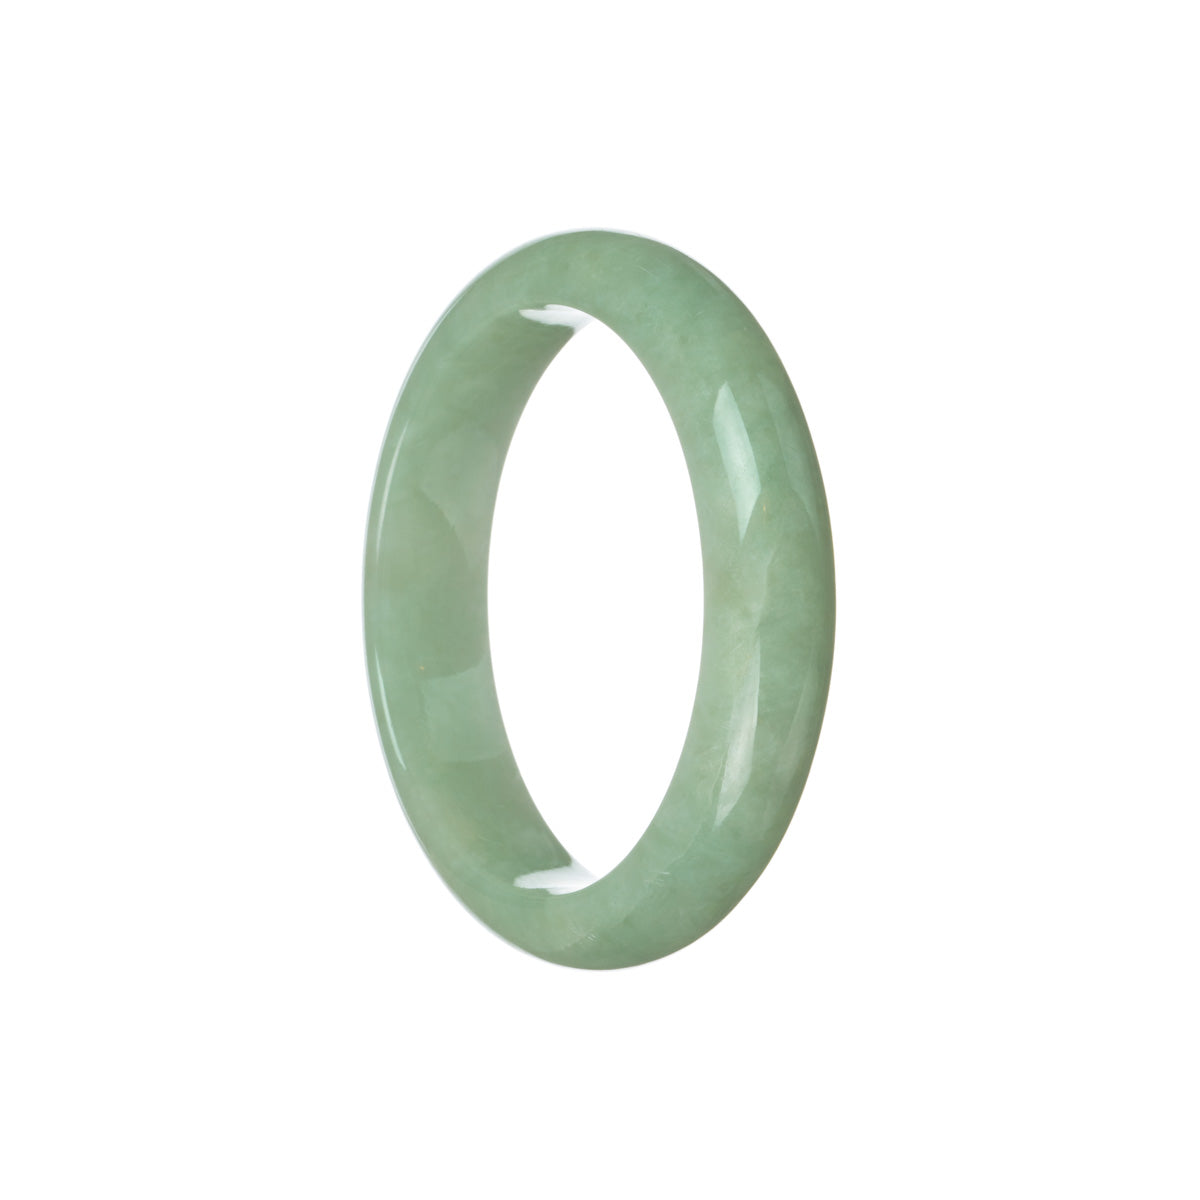 Close-up image of a light green Burmese jade bracelet, featuring a half moon shape. The bracelet is made of genuine Grade A jade, showcasing its exquisite quality. Perfect for adding a touch of elegance to any outfit.